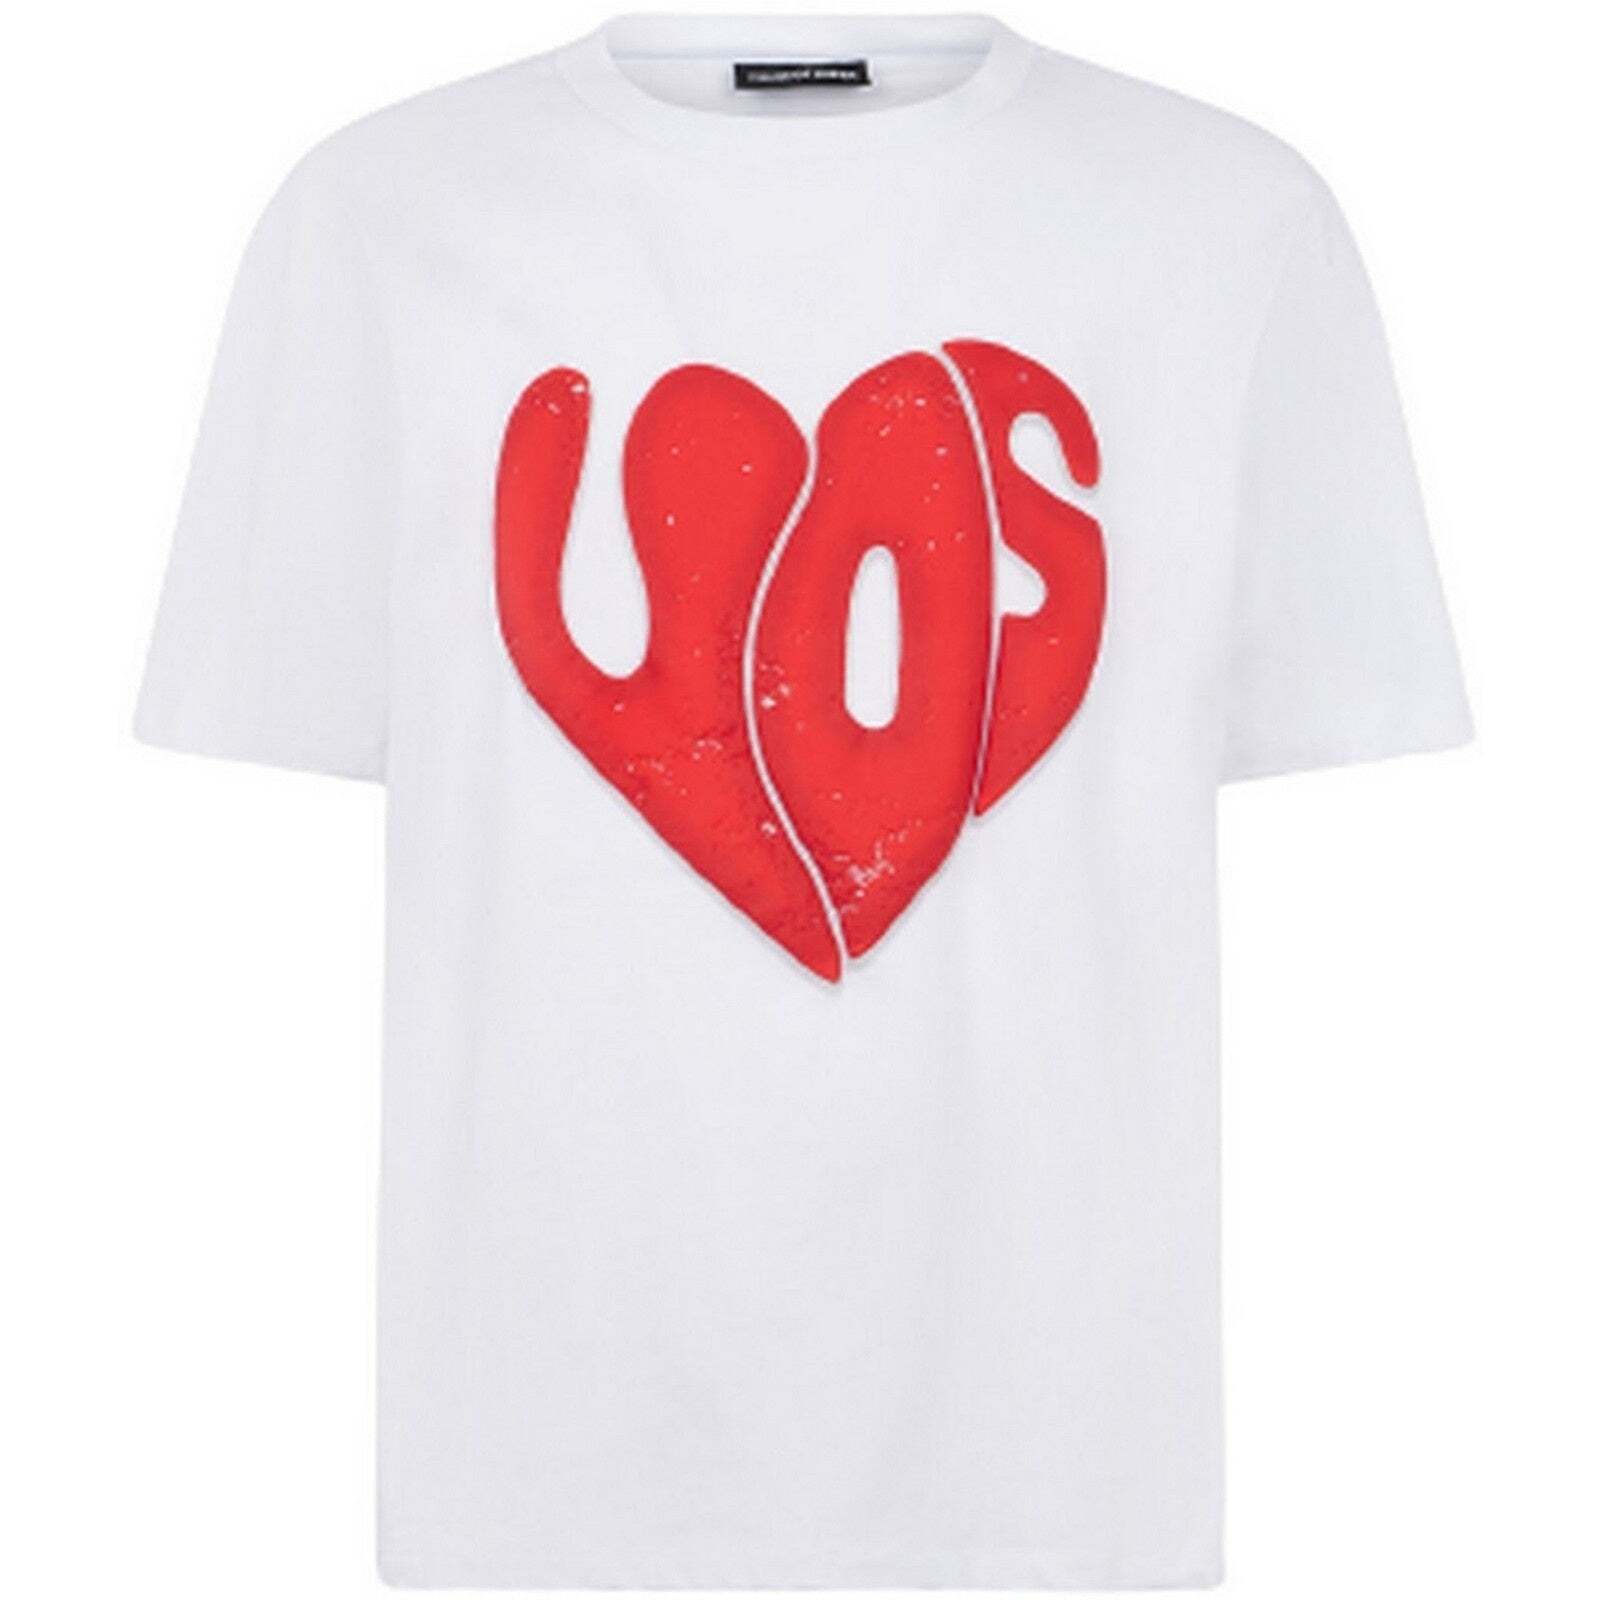 Image of T-shirt Uomo Vision of Super - Off White Tshirt With Puffy Vos Print - Bianco